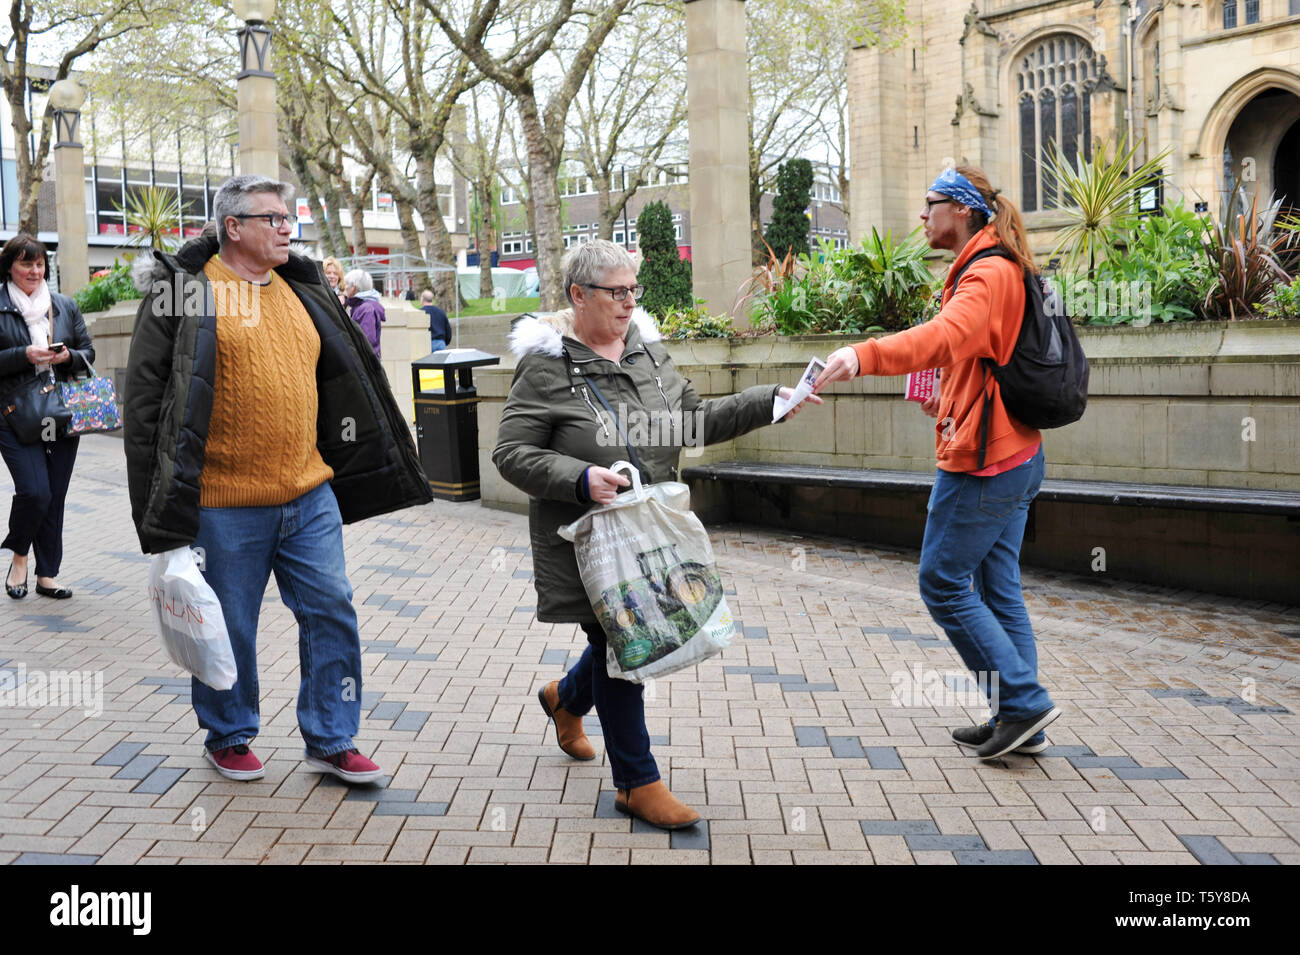 Wakefield, West Yorkshire, England, UK, 27th April 2019. An anti-UKIP protestor gives a leaflet to a passing shopper in the city centre ahead of local elections and possible EU elections should the UK still be in the EU on March 23rd. Credit: Paul Biggins/Alamy Live News Stock Photo